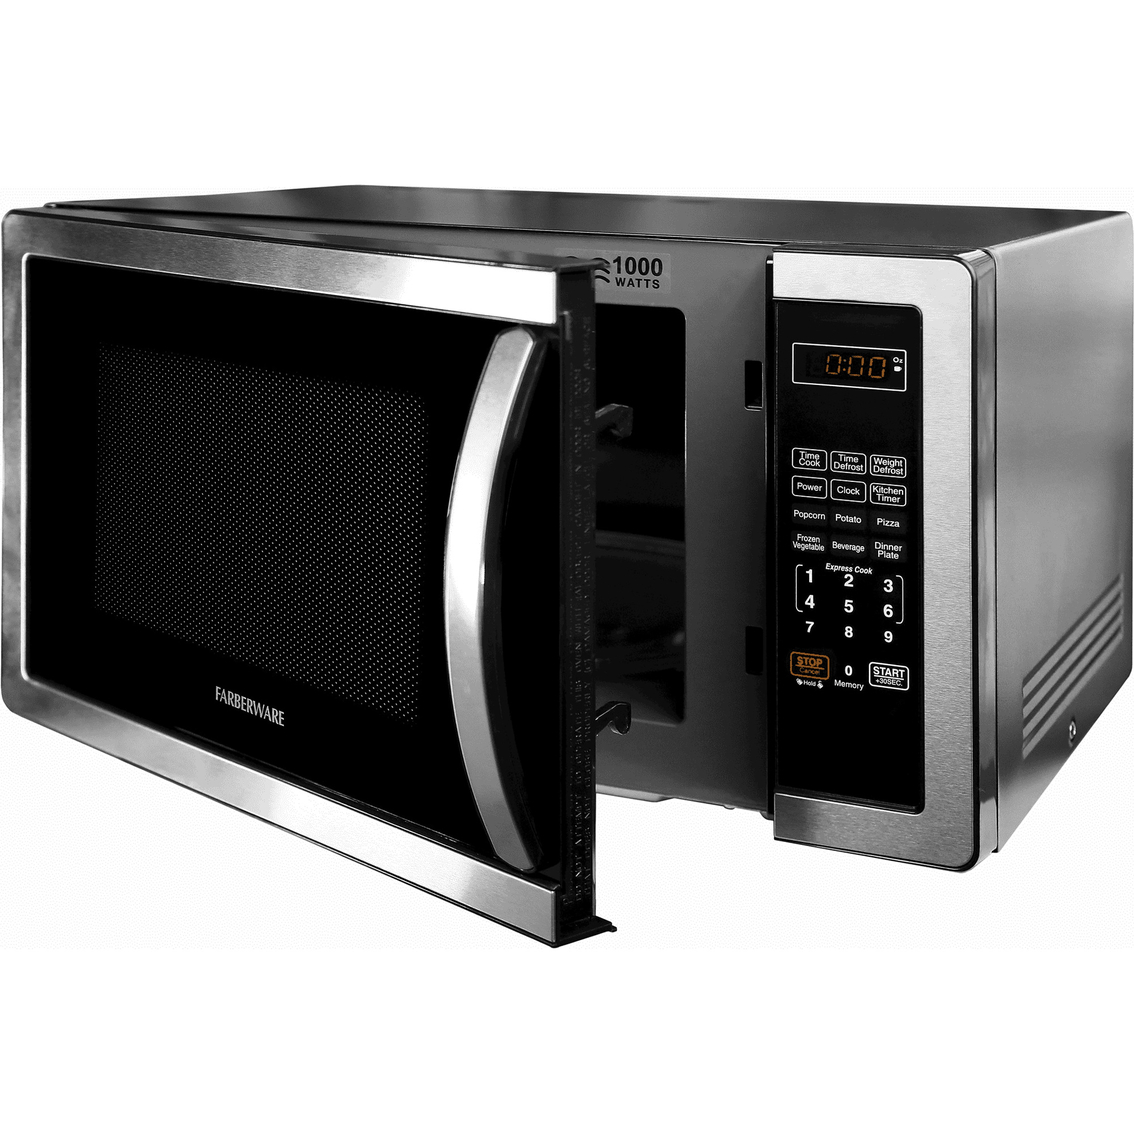 Farberware Classic 1.1 cu. ft. 1000W Microwave Oven - Image 2 of 2